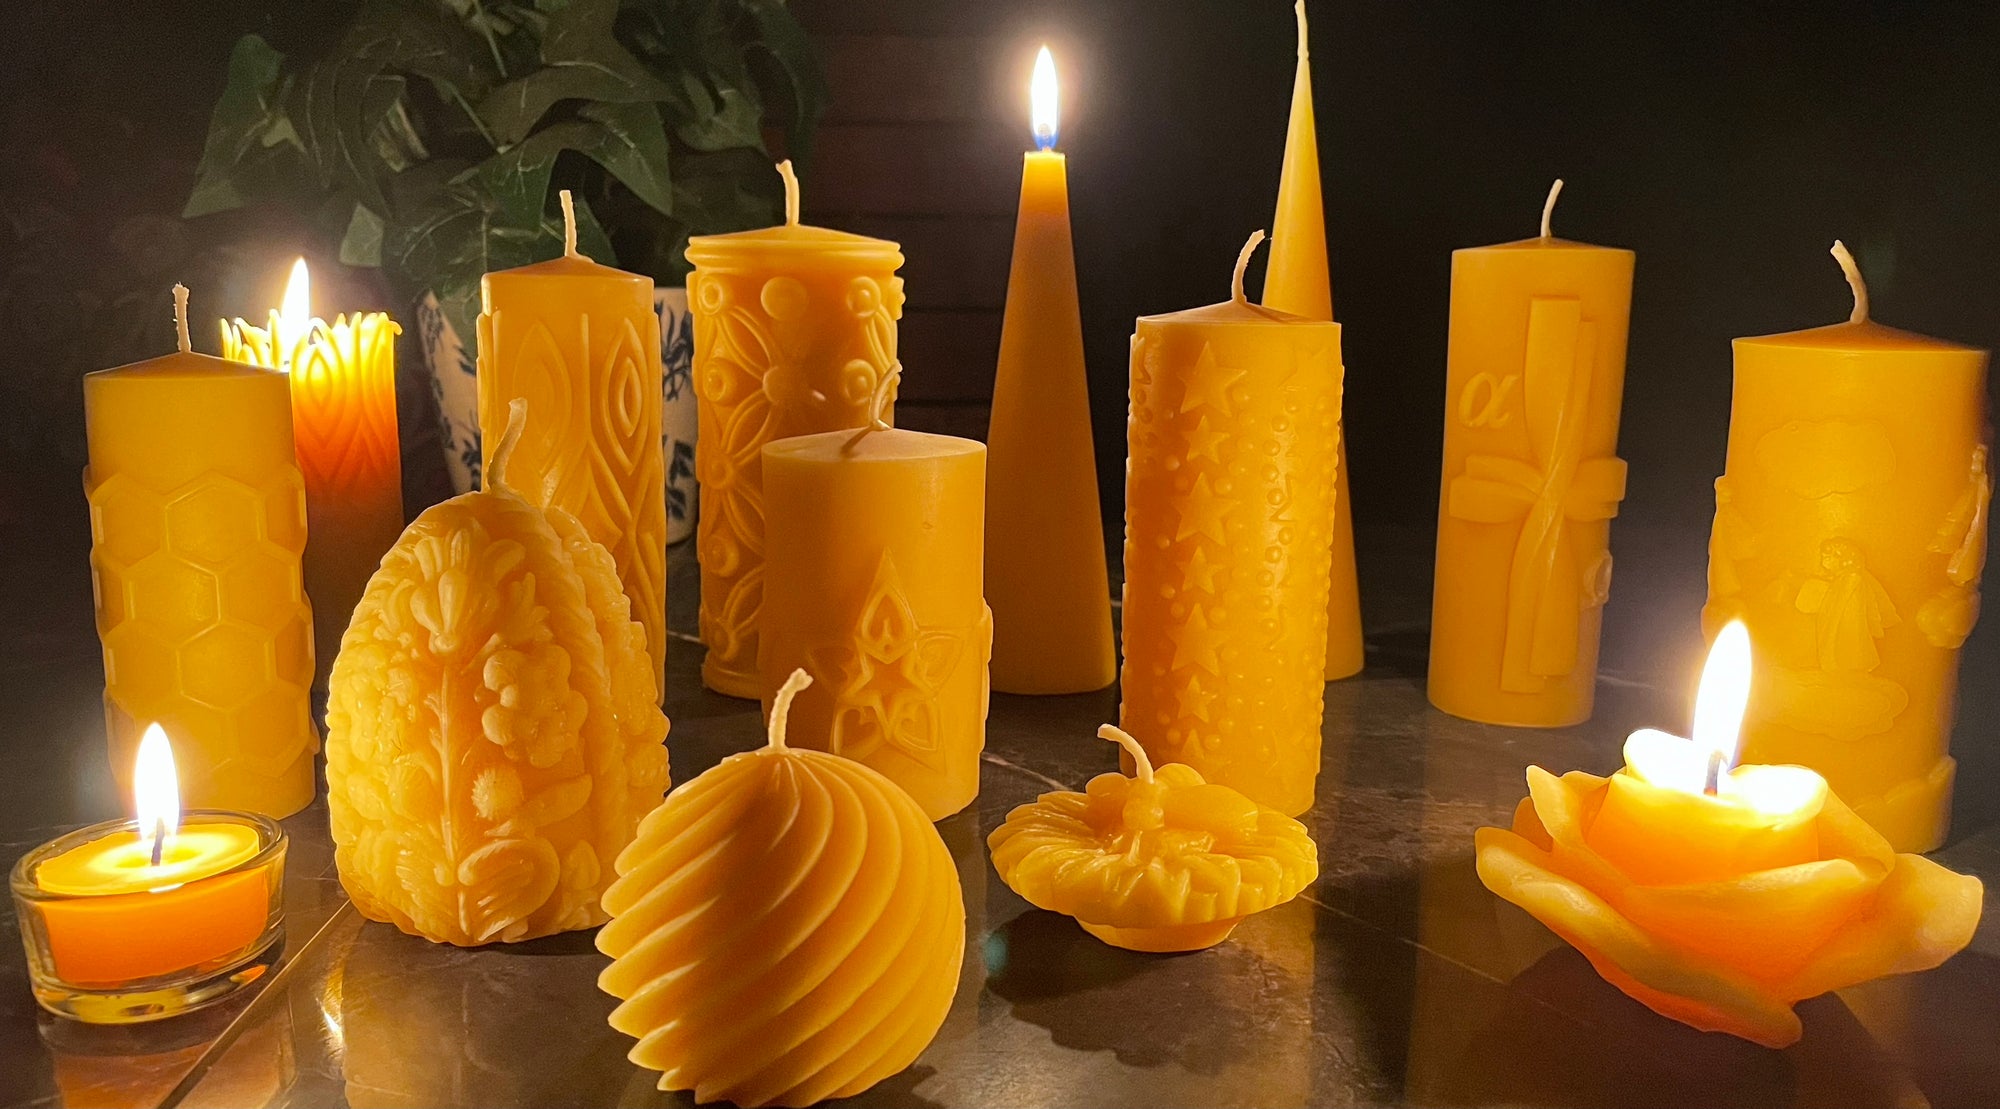 Natural Beeswax - Pellet Form  All Australian Candle Making Supplies &  Kits - CandleMaking